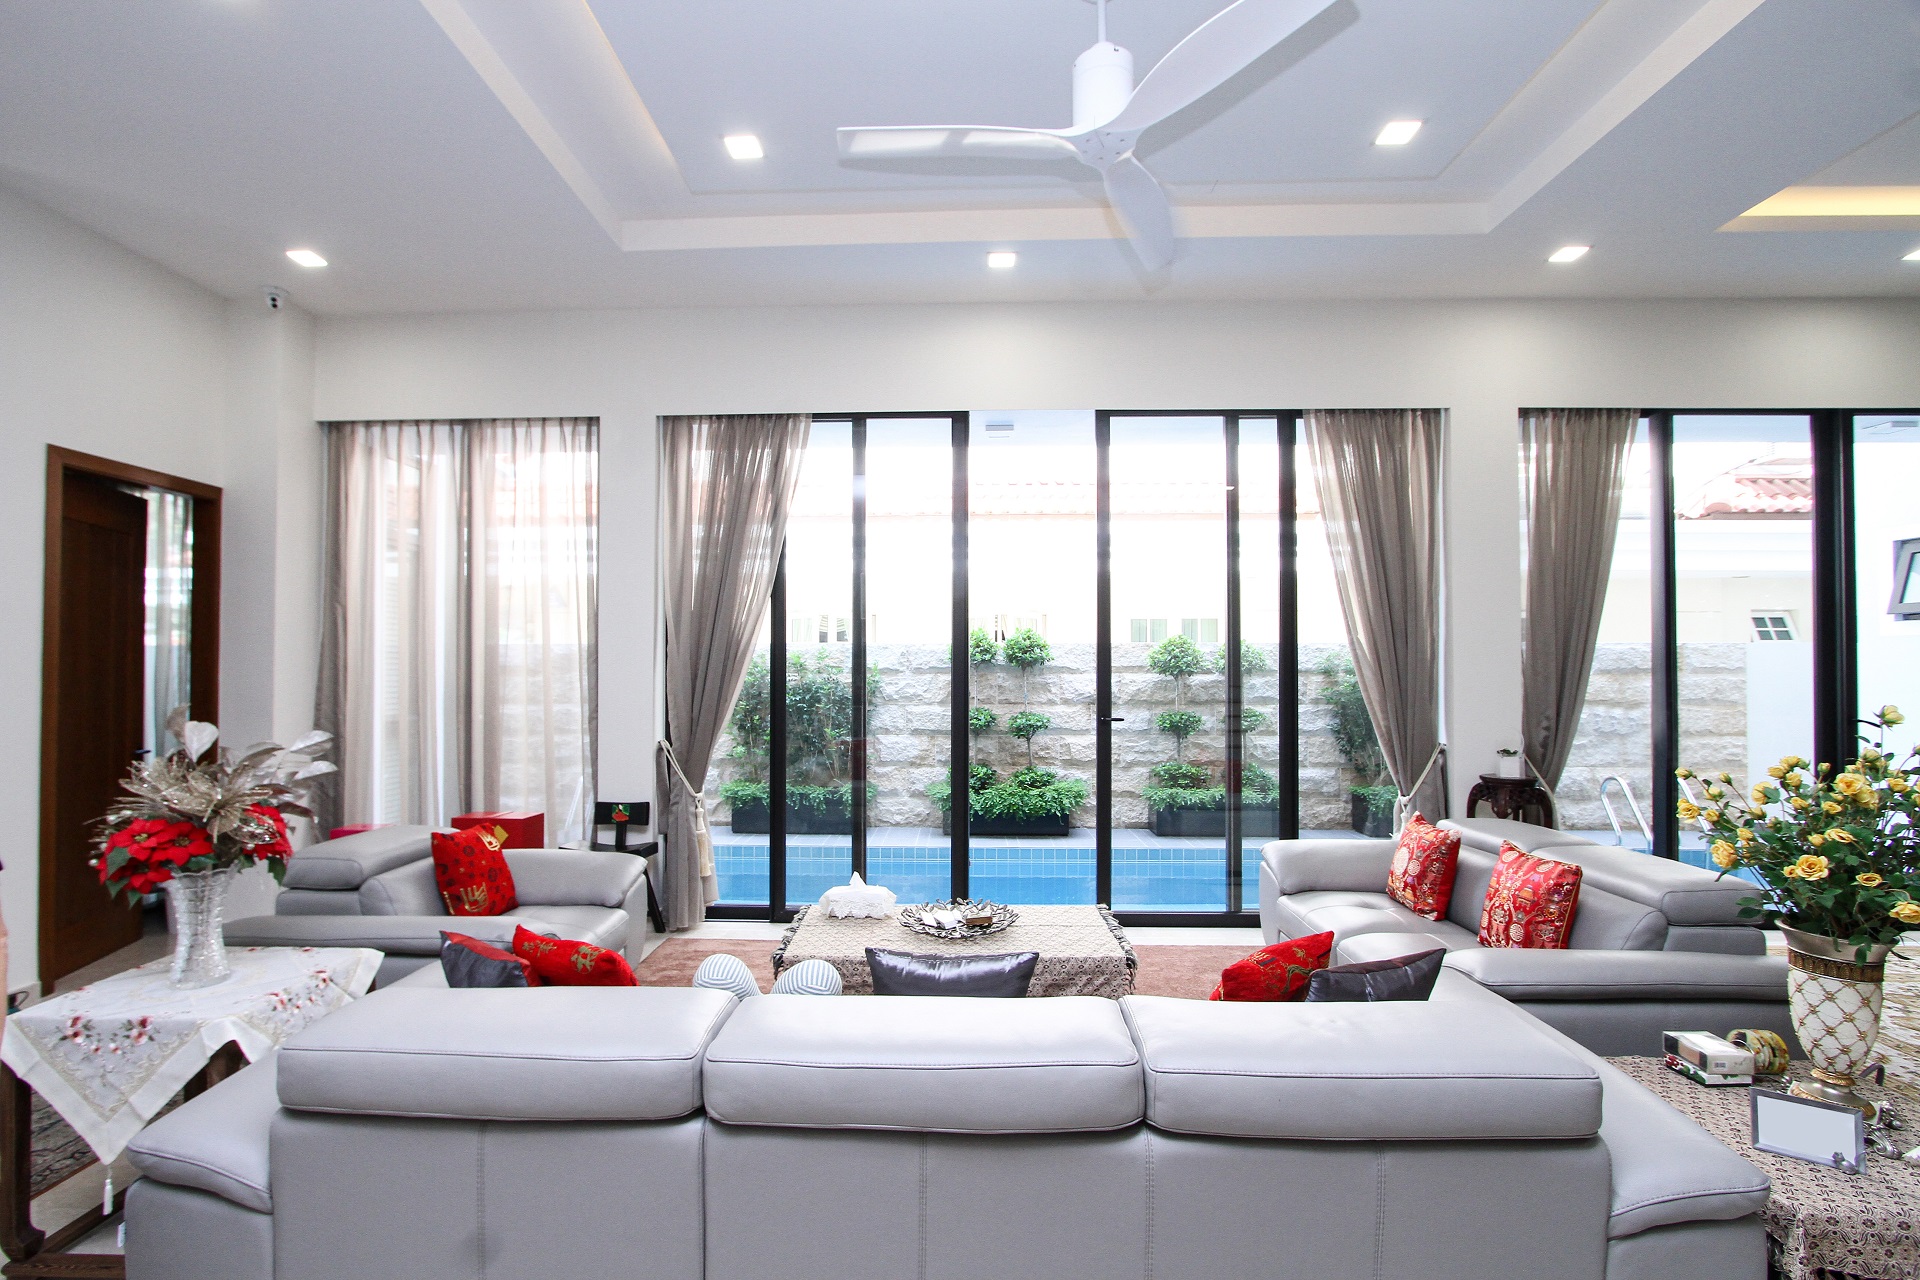 Asiatic Contemporary 3 By Nic Wes Builders, Design Authority